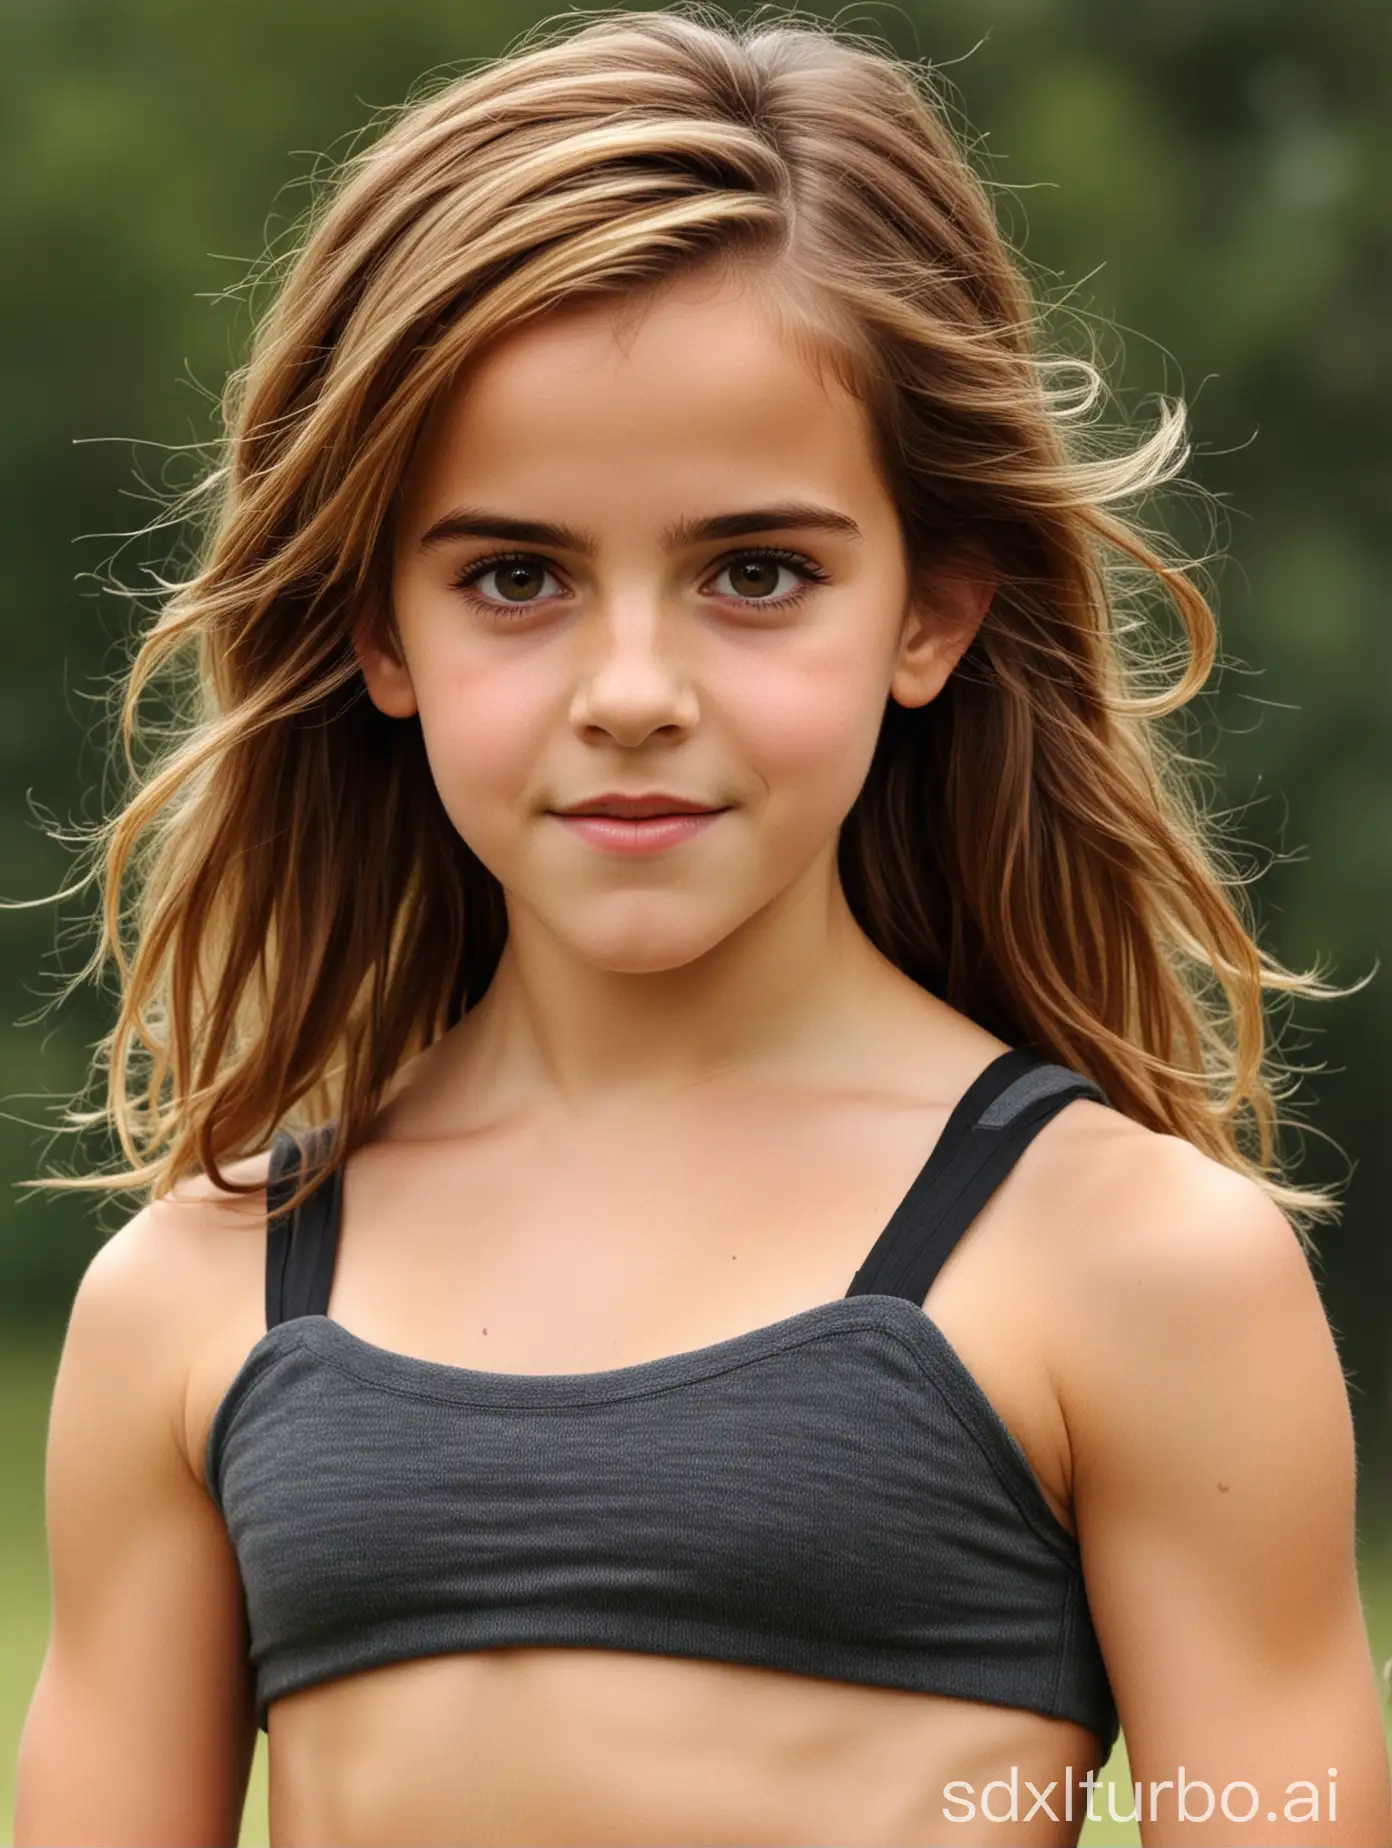 Emma-Watson-Childhood-Portrait-with-Muscular-Abs